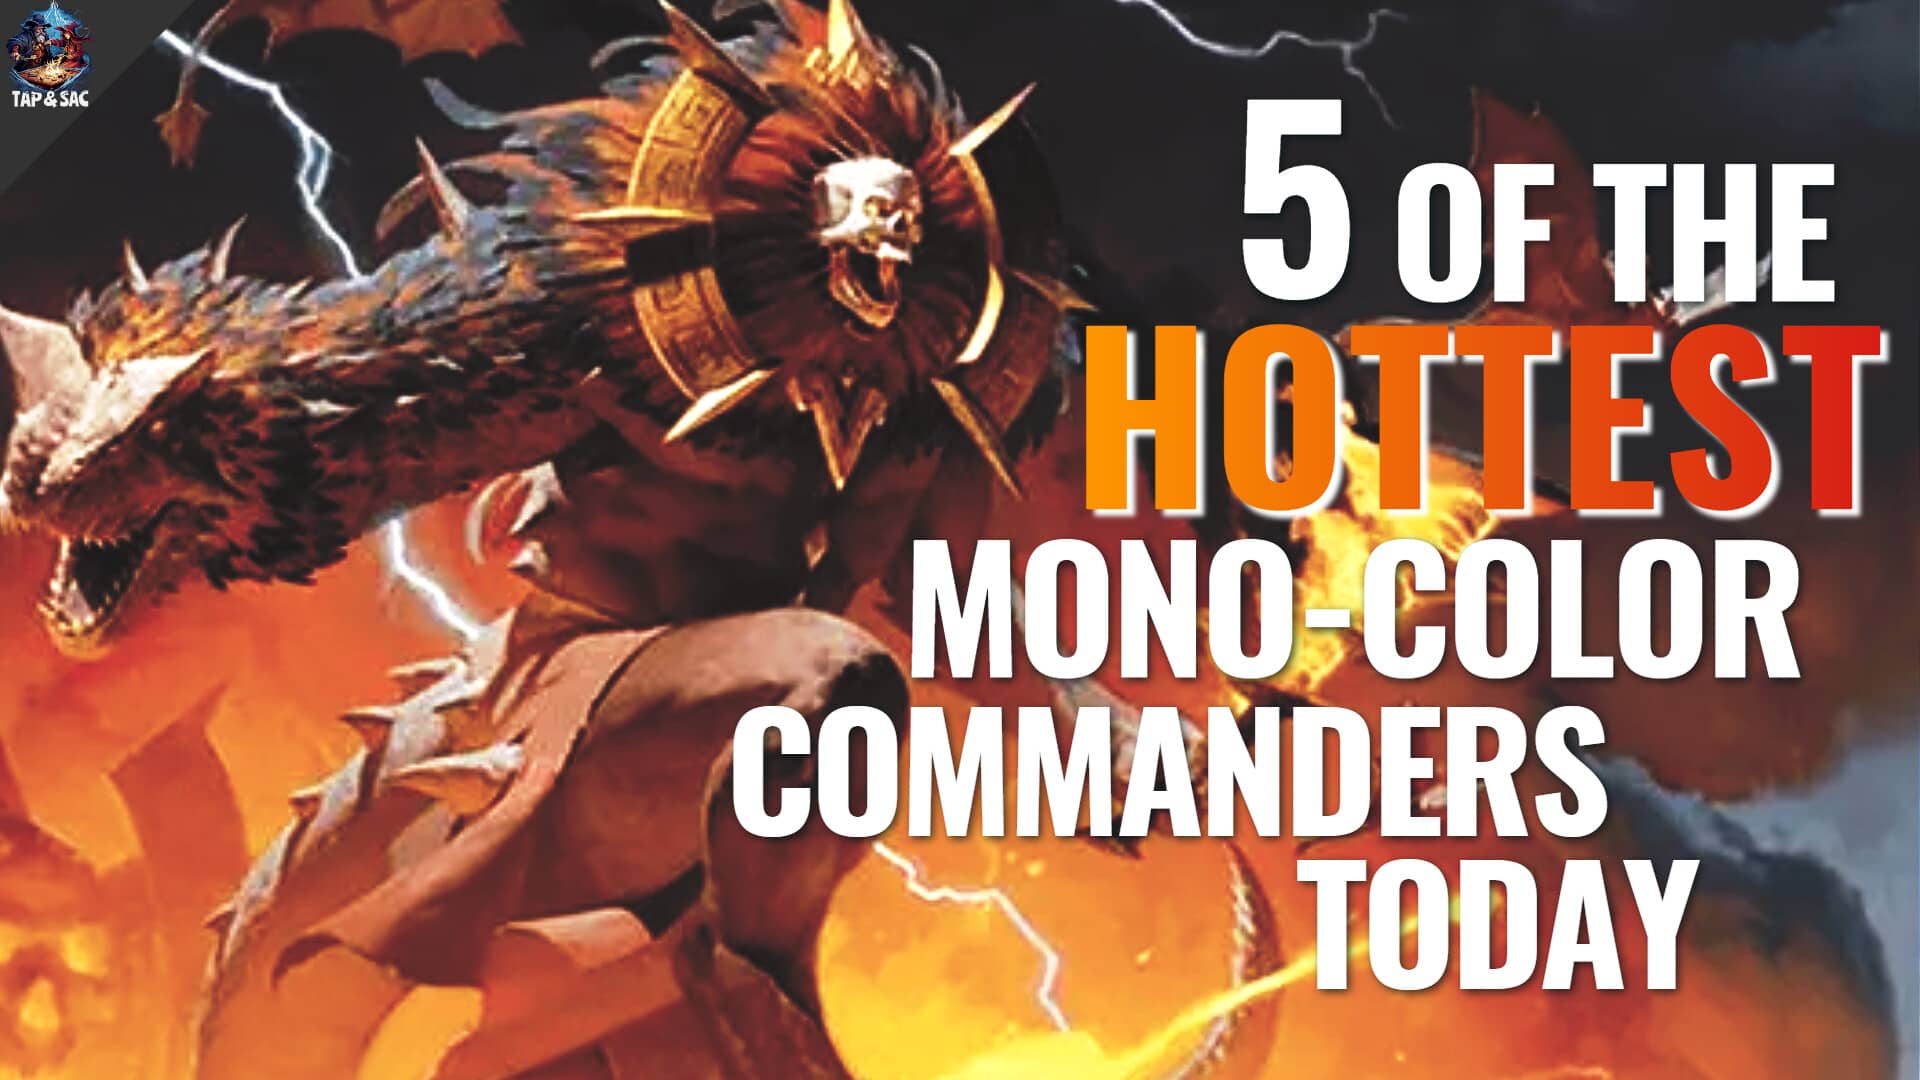 Tired of seeing multicolor commanders in mtg? Here are the latest and hottest mono-color commanders to build around and play